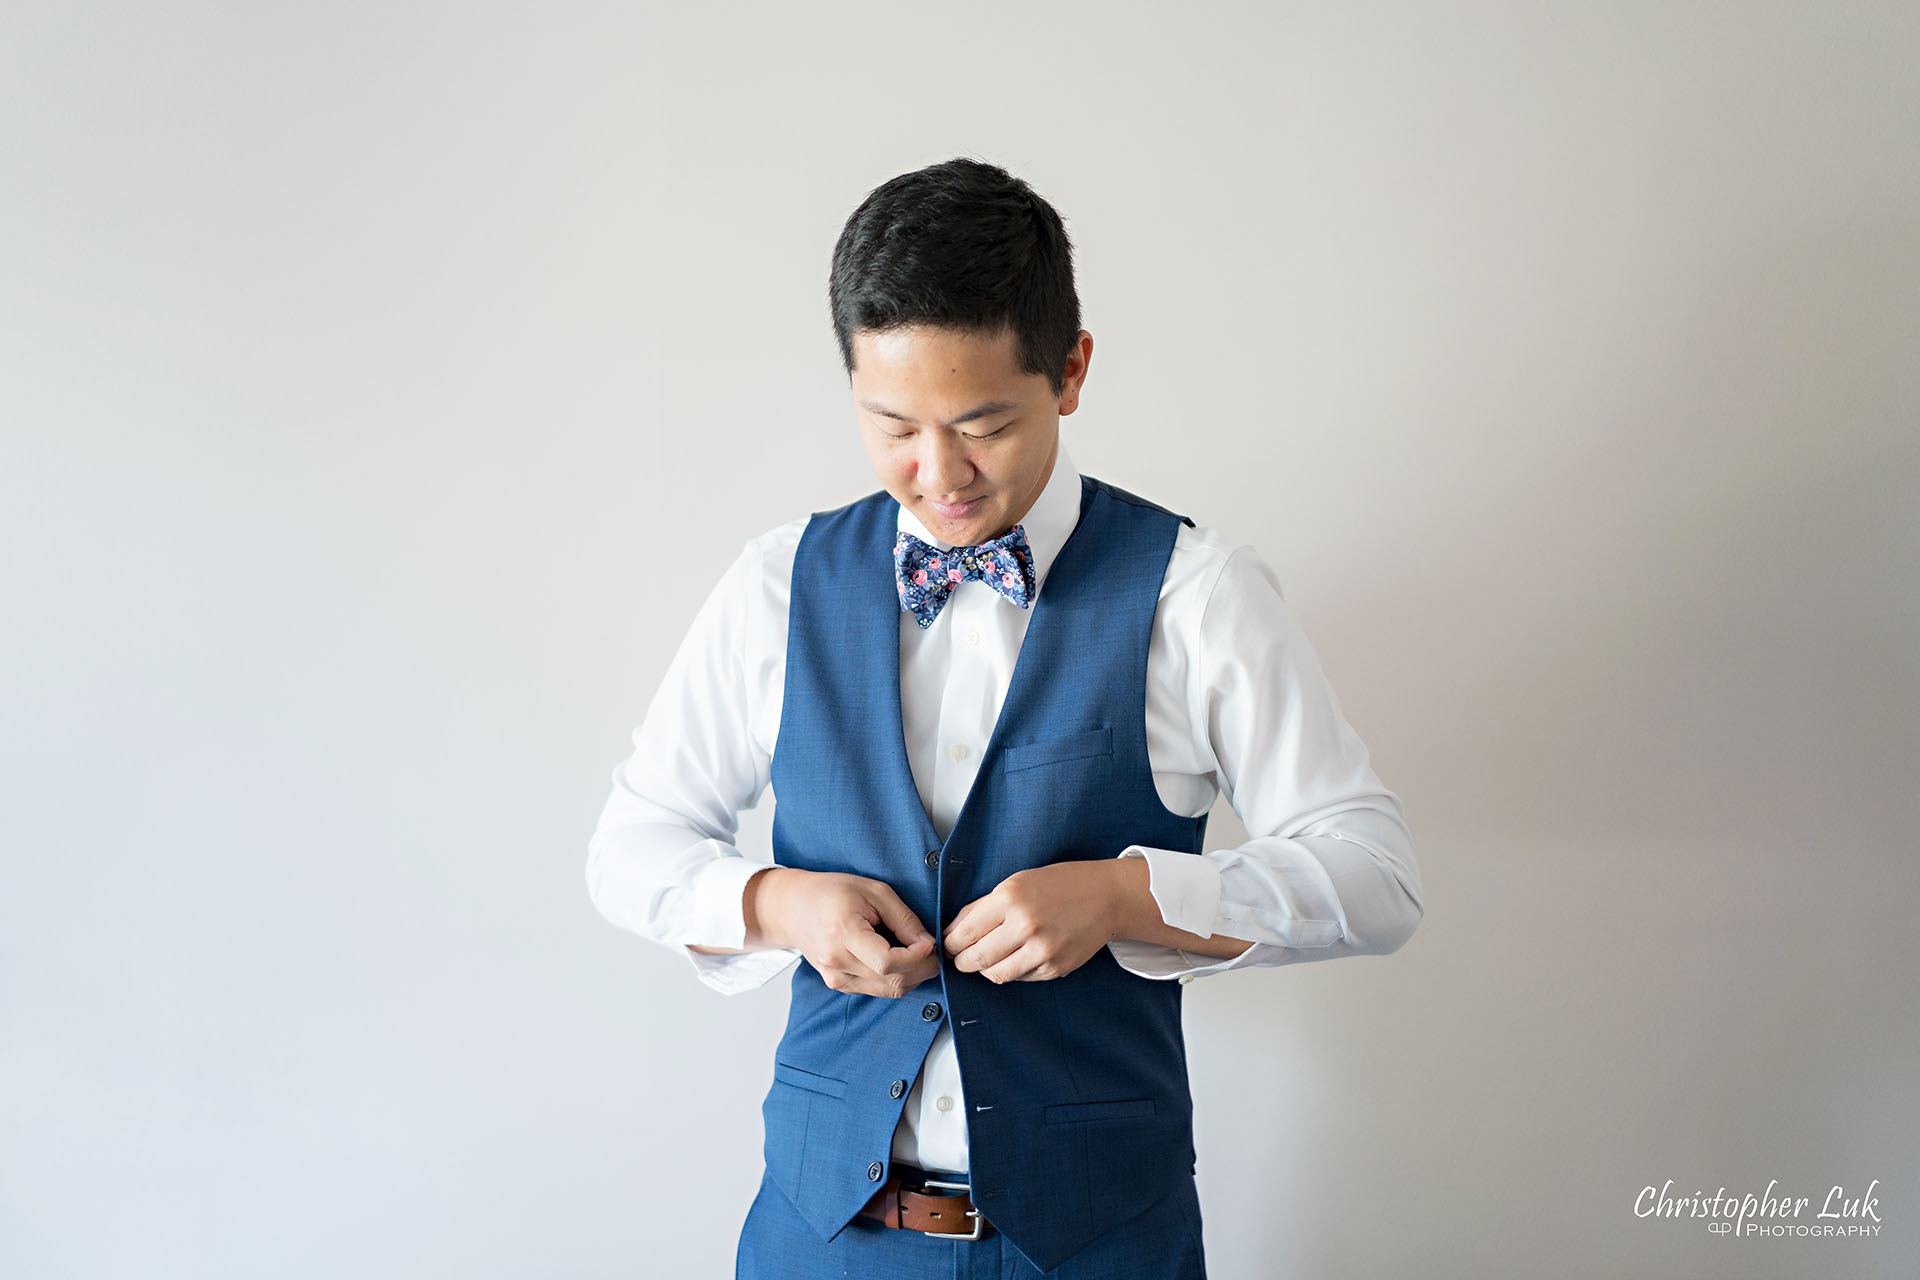 Christopher Luk Toronto Wedding Photographer Bridle Trail Baptist Church Unionville Main Street Crystal Fountain Event Venue Groom Vest Blue Navy Waistcoat Getting Ready Natural Photojournalistic Candid Smile